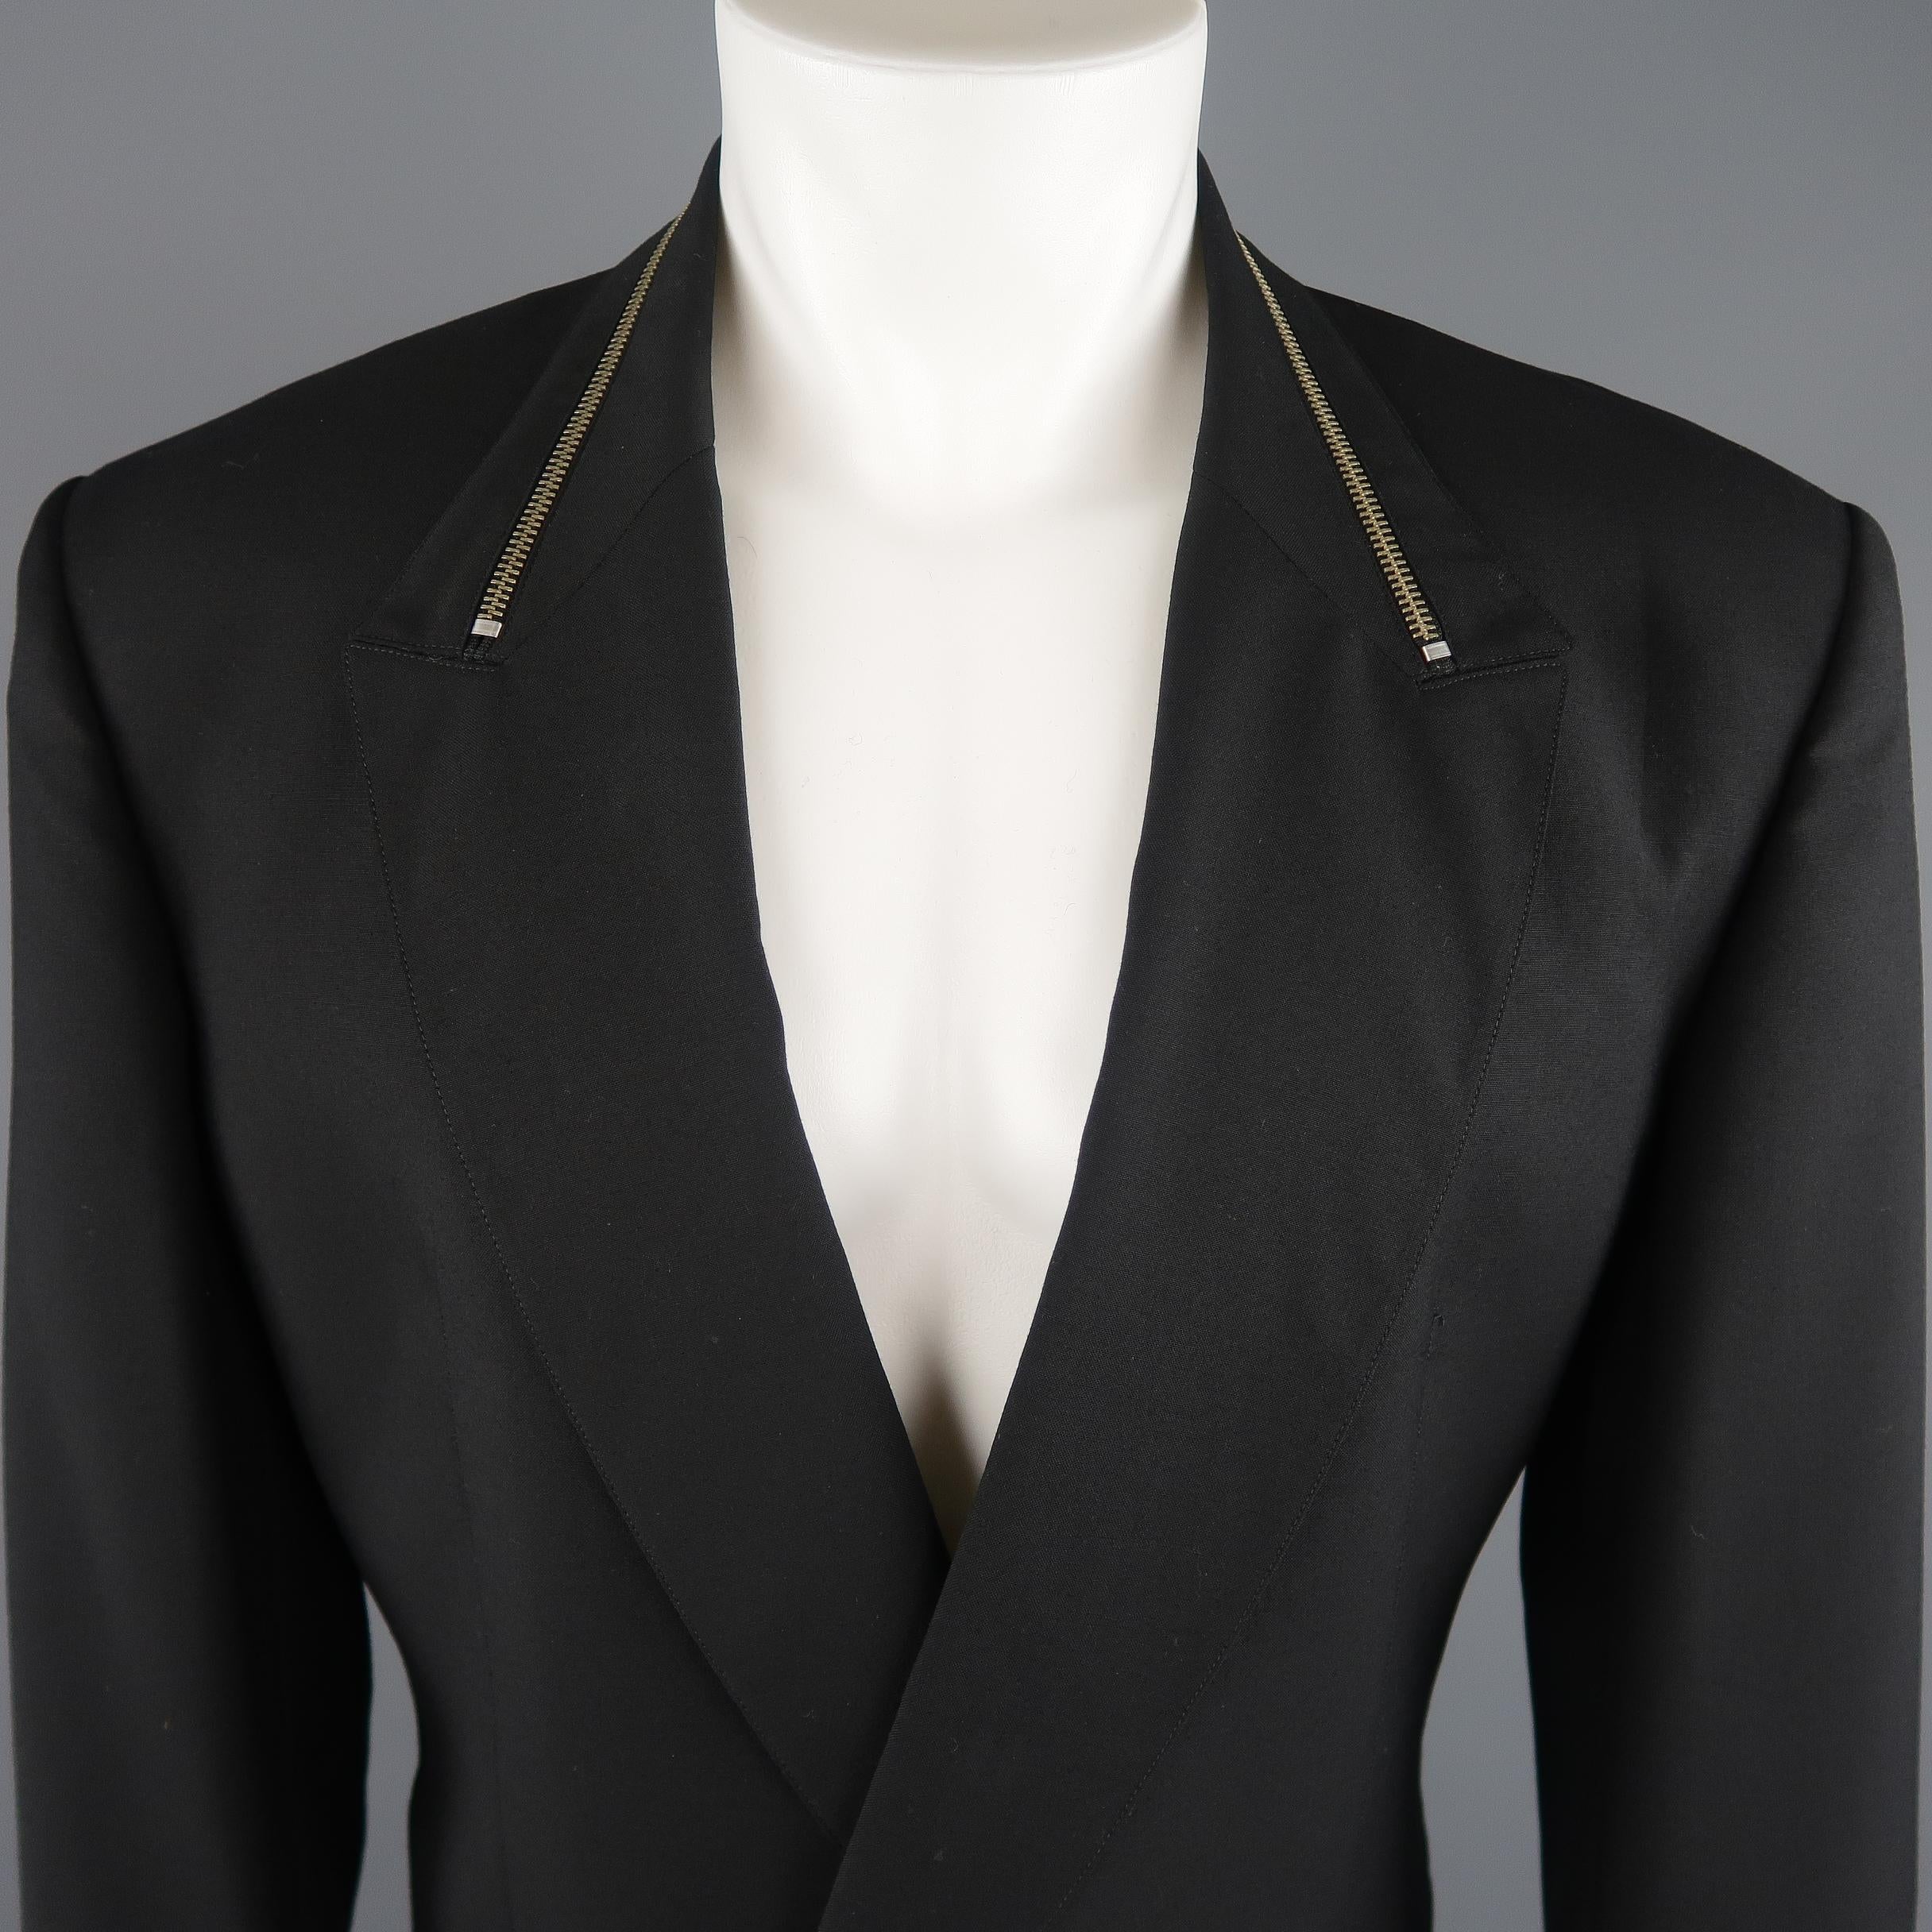 Vintage CLAUDE MONTANA sport coat comes in black wool with a zipper accented peak lapel, double breasted front, and silver tone metal buttons.  Made in Italy.
 
Good Pre-Owned Condition.
Marked: (no size)
 
Measurements:
 
Shoulder: 19 in.
Chest: 44